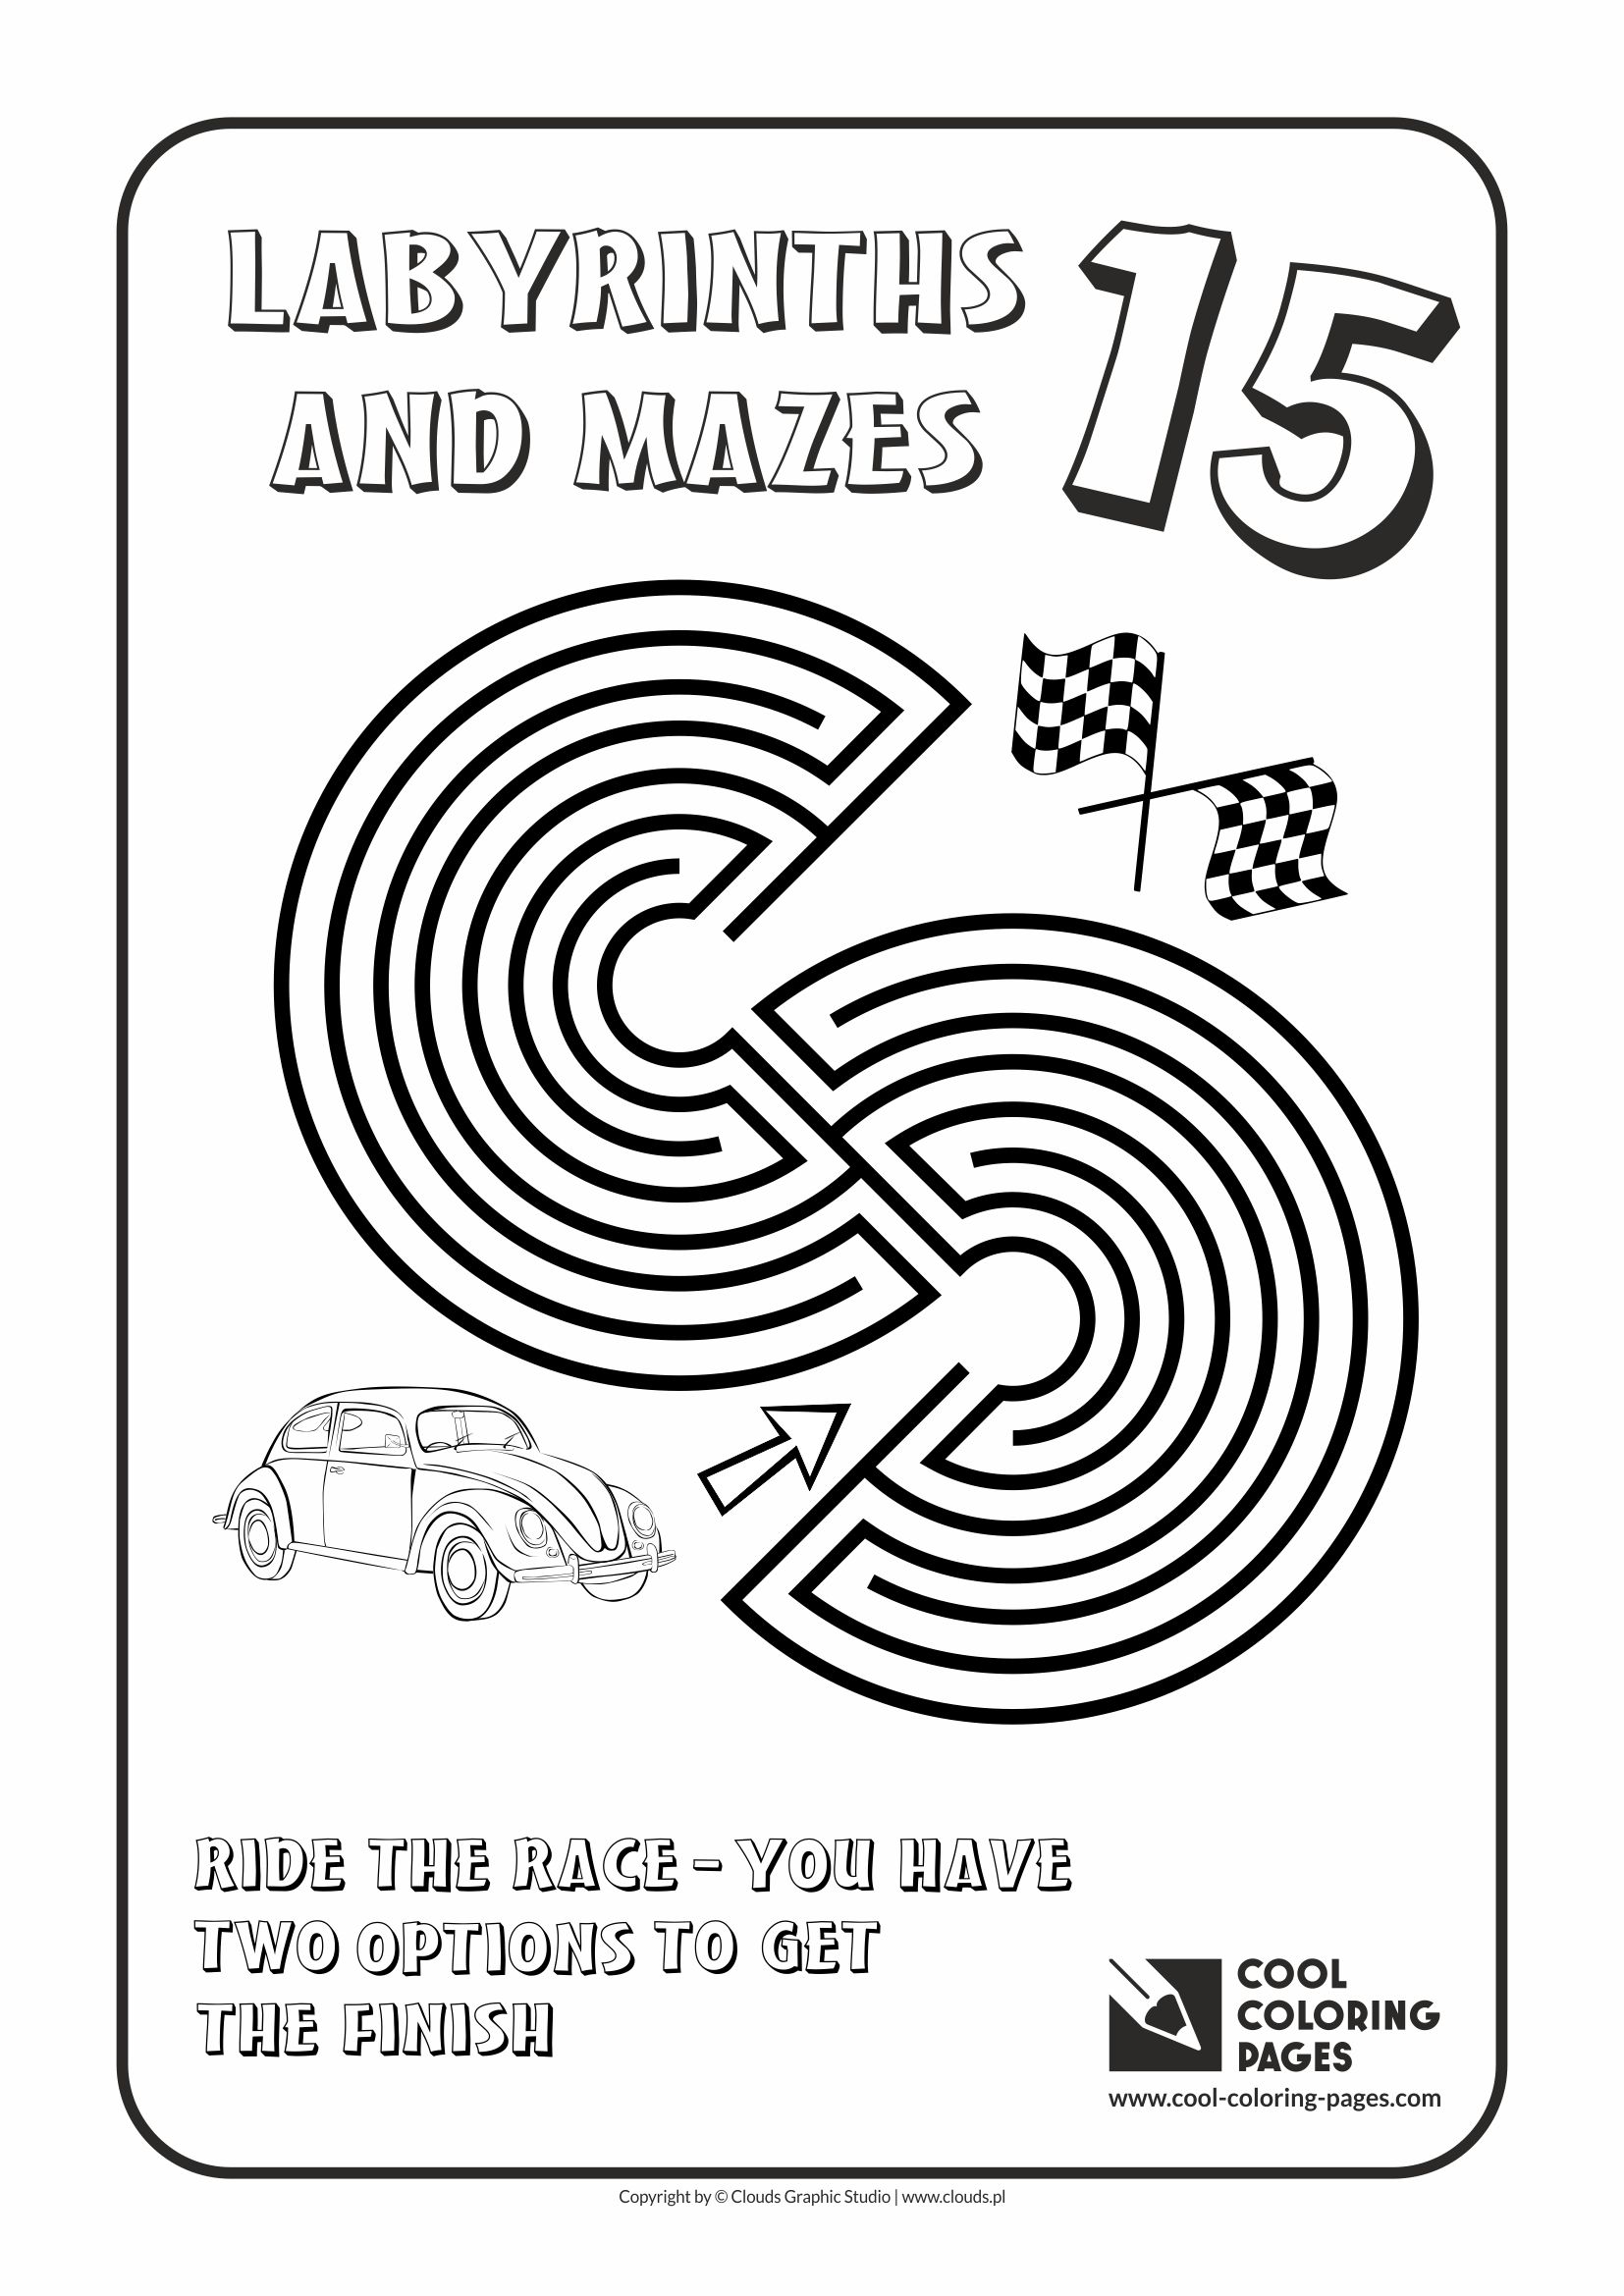 Cool Coloring Pages - Labyrinths and mazes / Maze no 15